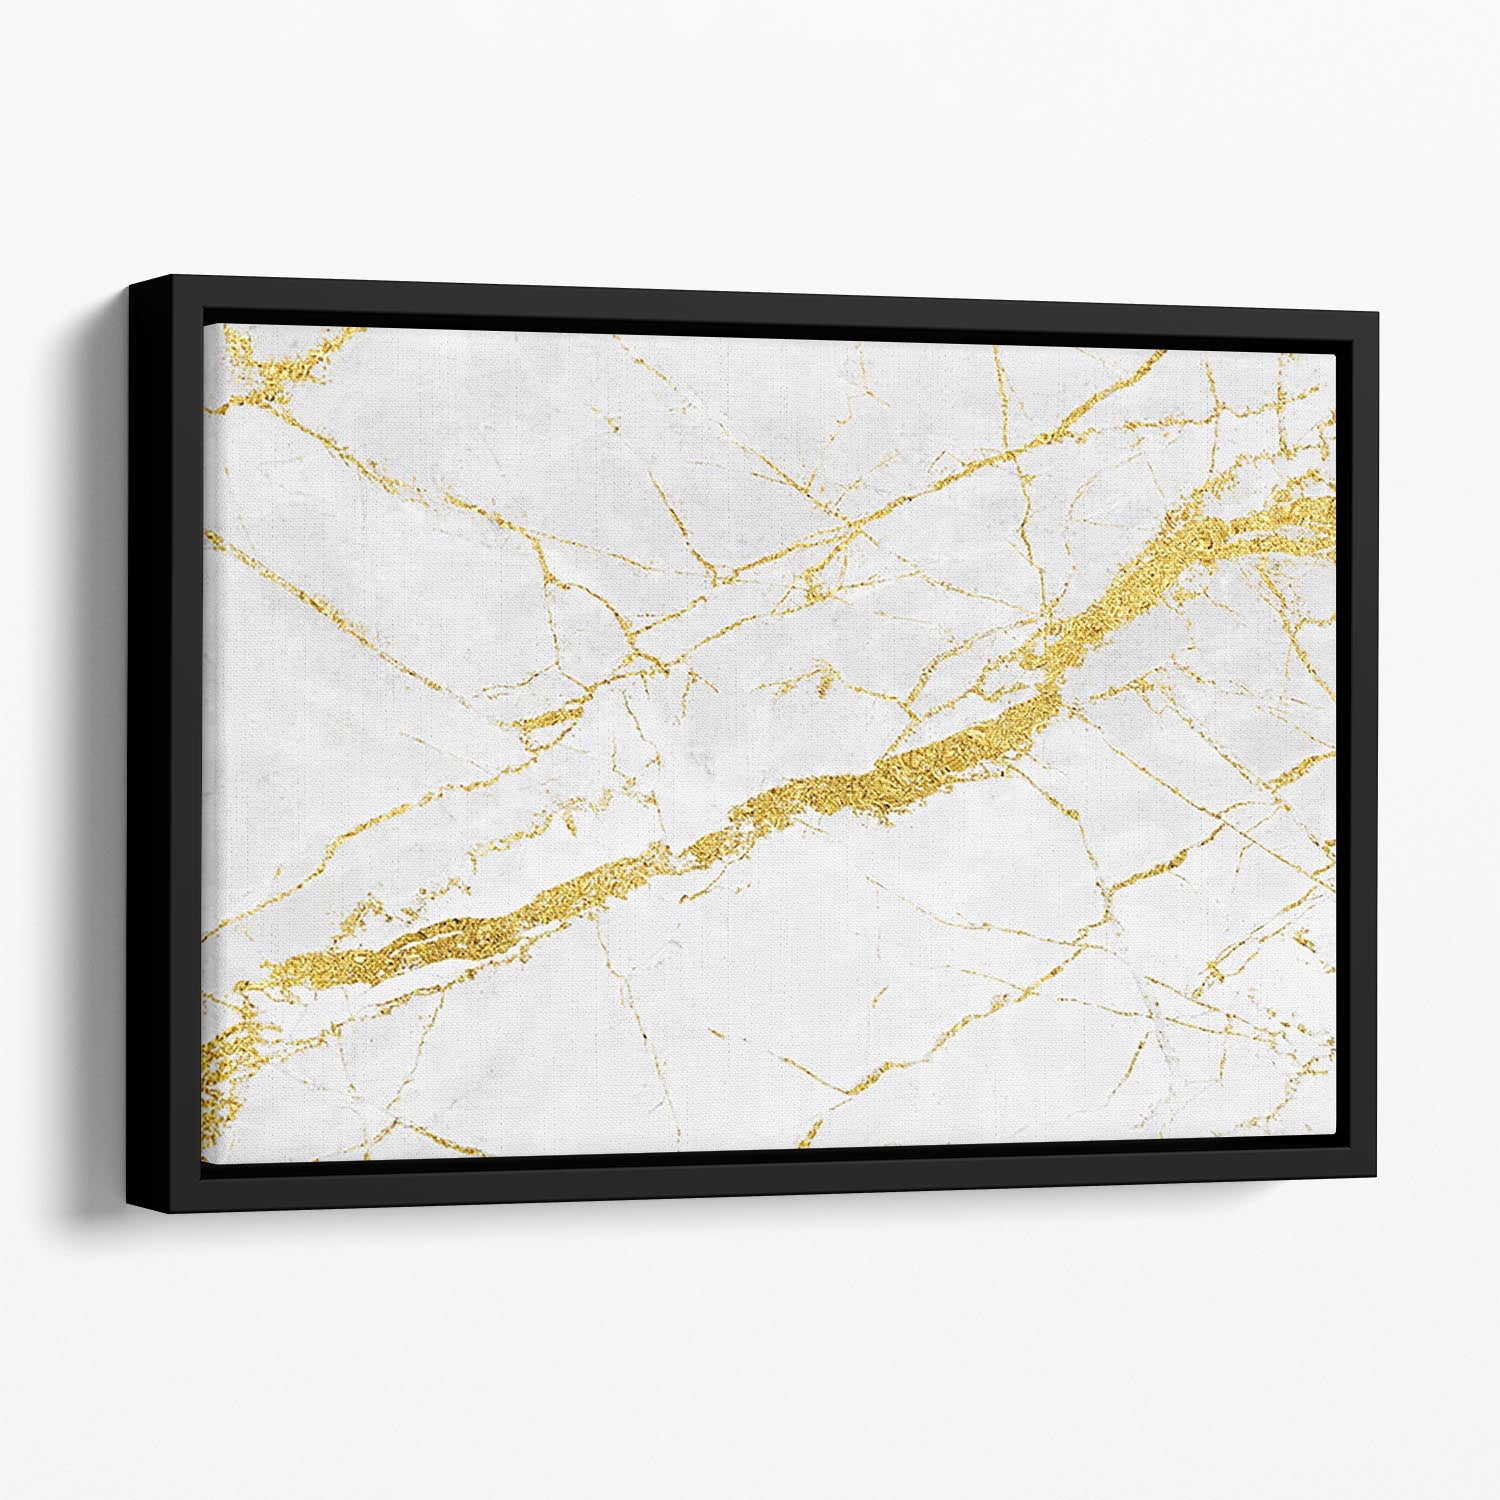 White and Gold Cracked Marble Floating Framed Canvas - Canvas Art Rocks - 1